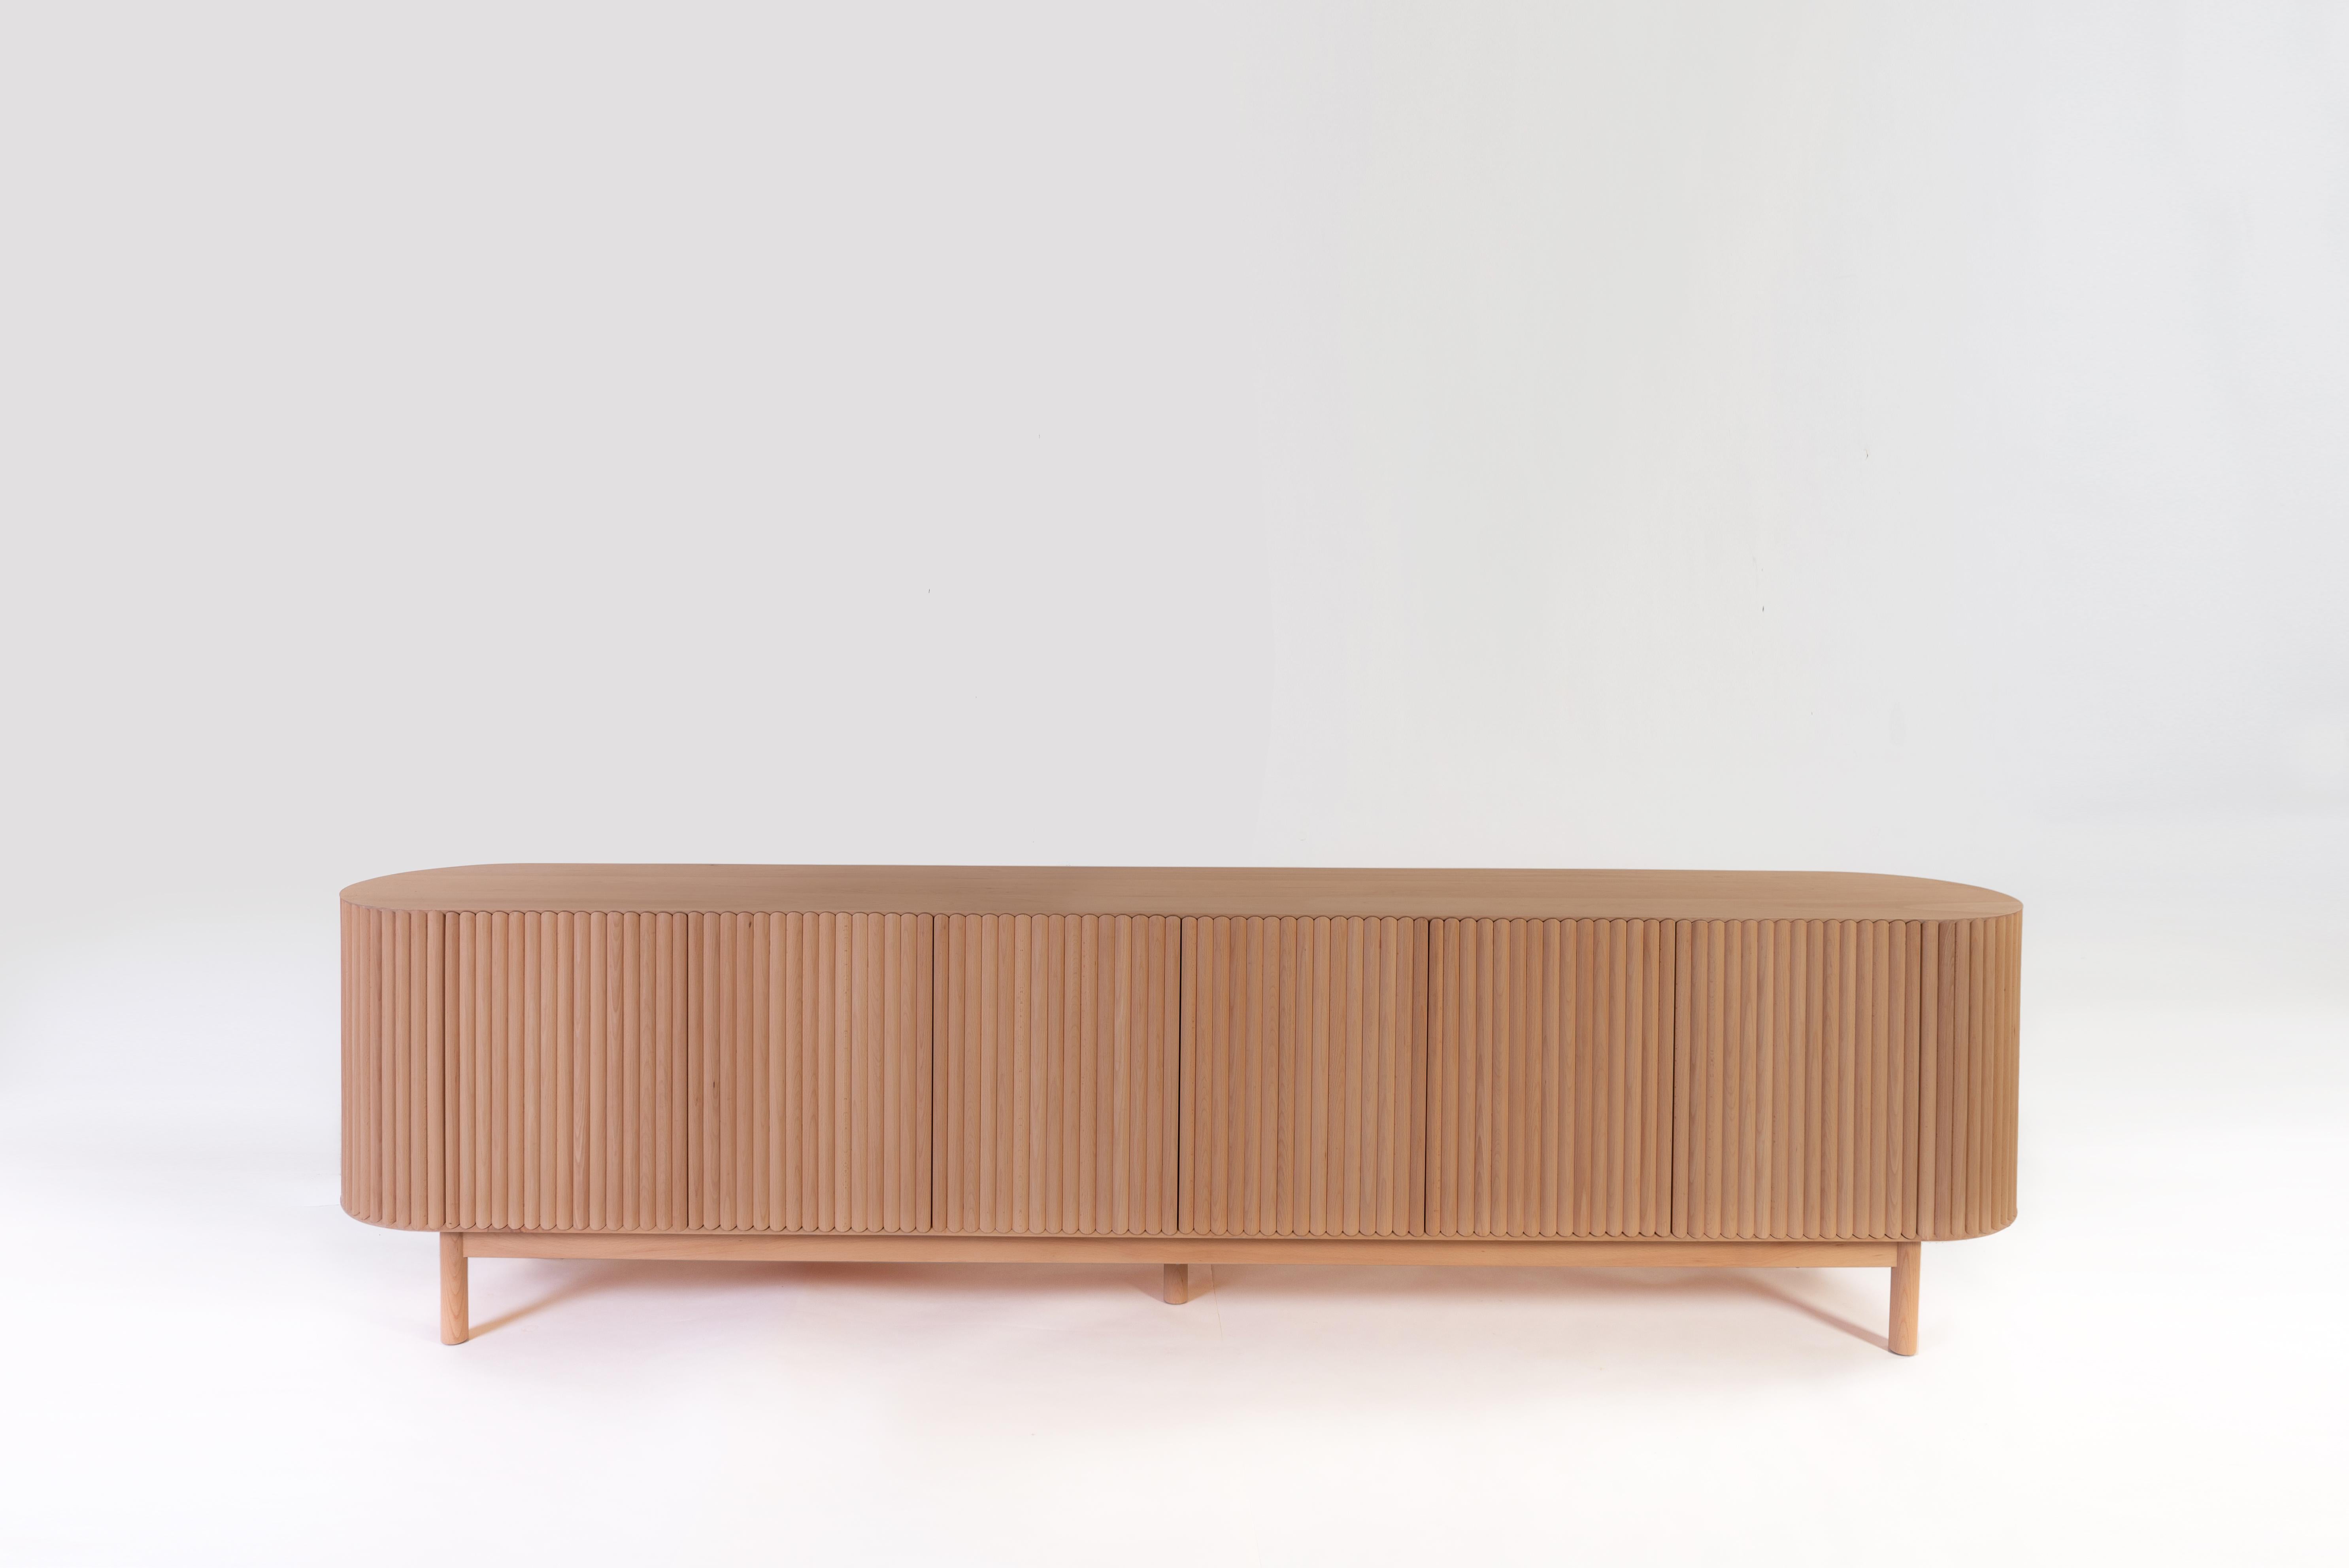 Between the sculpture and the functionality of the object, the RIMA credenza is inspired by the dynamism and the cadence of a poem, drawing all the attention to the wooden slats that are repeated one after the other to form a texture that embraces